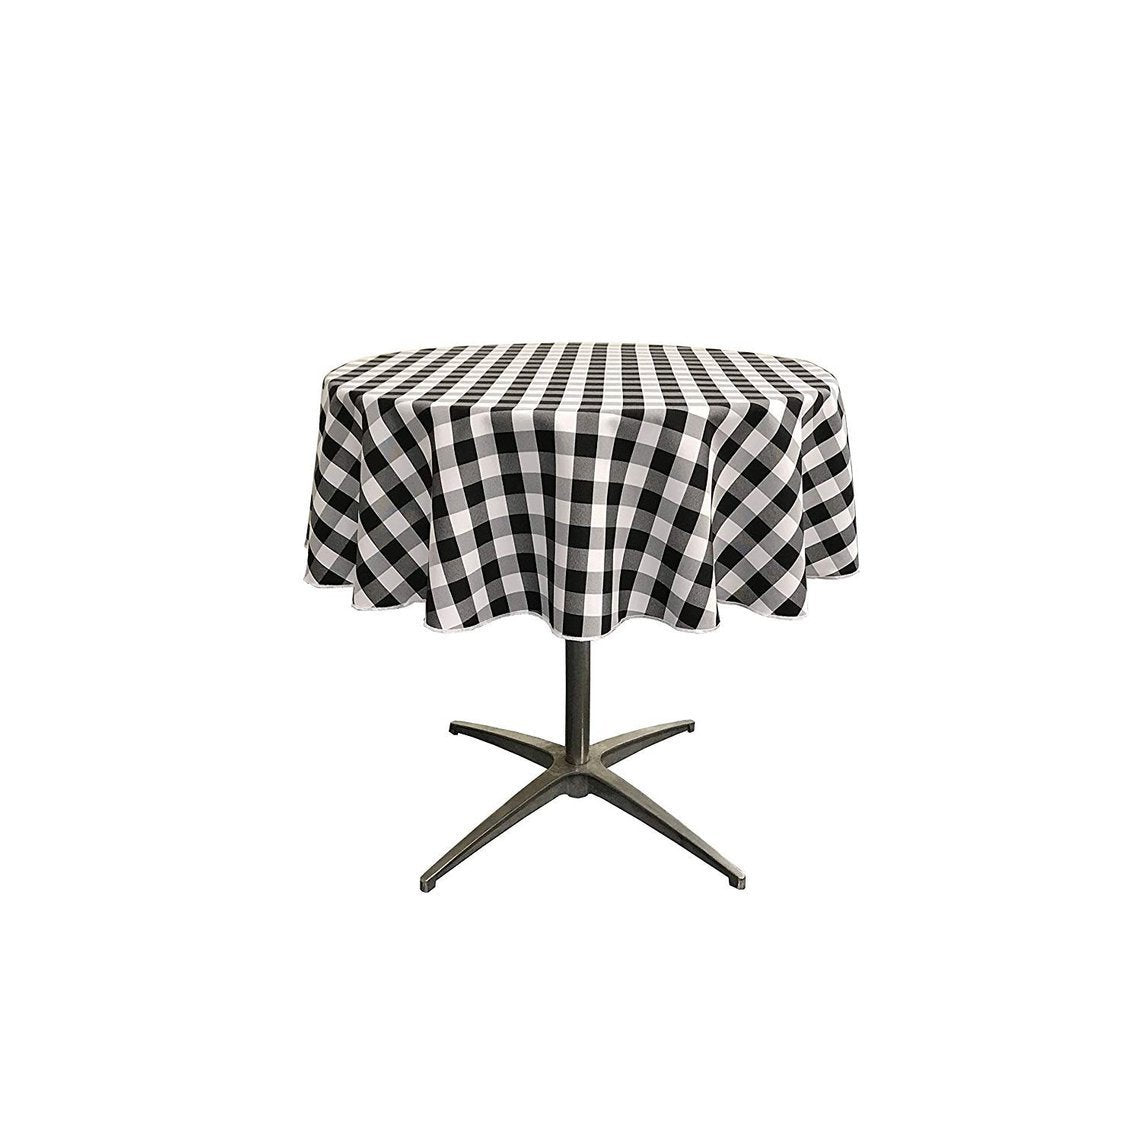 Poly Checkered Round Tablecloth, 51-Inch, Decoration, Parties Decor, Home Decor, Birthday Parties Table ClothesICE FABRICSICE FABRICSBlack/WhitePoly Checkered Round Tablecloth, 51-Inch, Decoration, Parties Decor, Home Decor, Birthday Parties Table Clothes ICE FABRICS